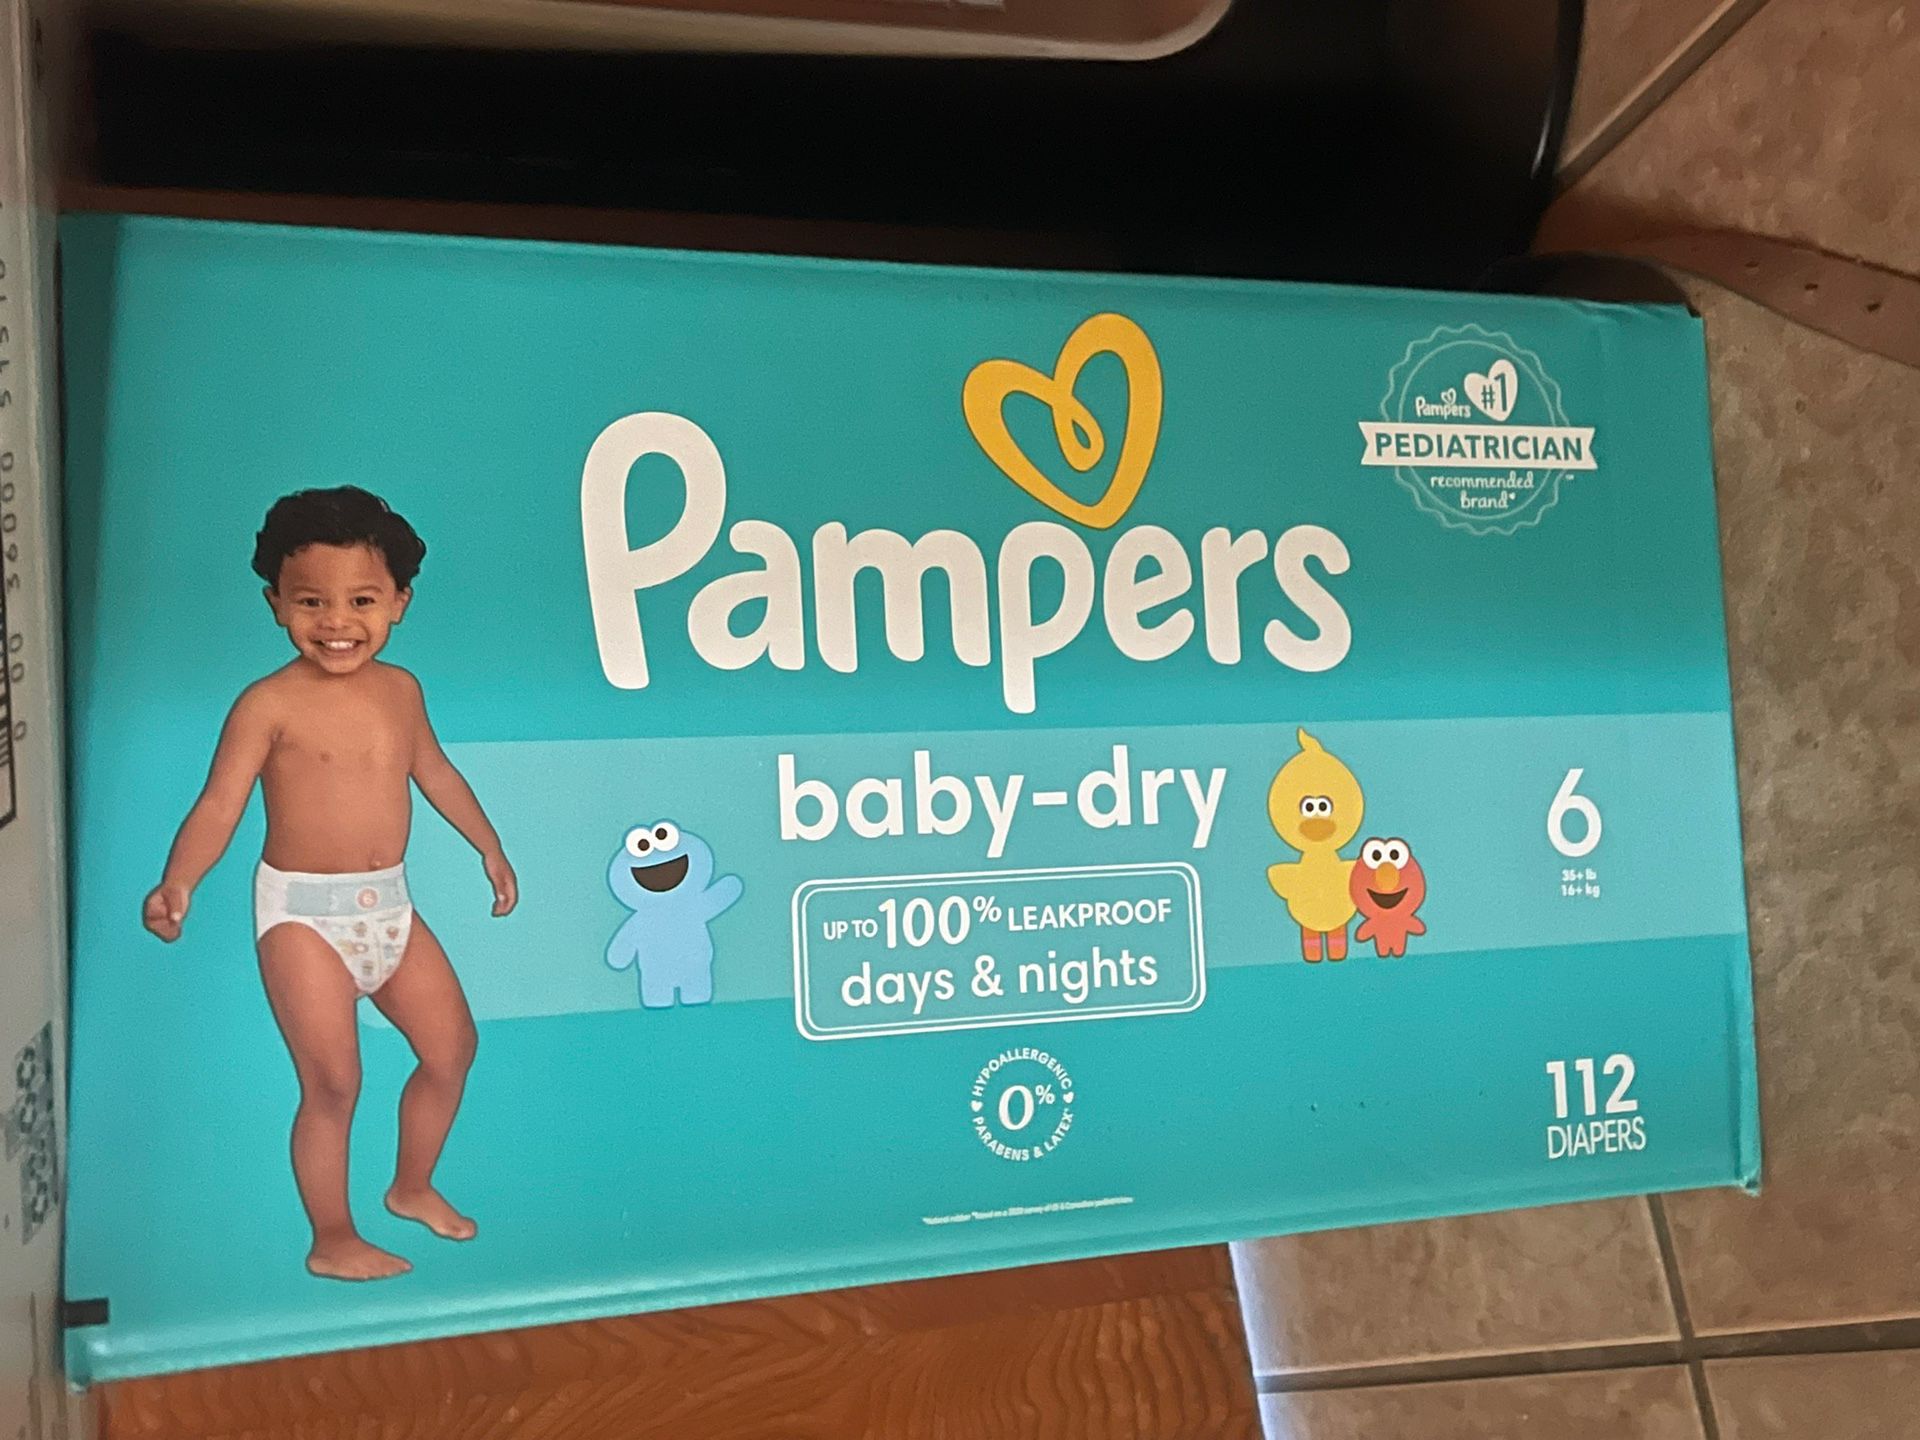 Pamper Diapers 